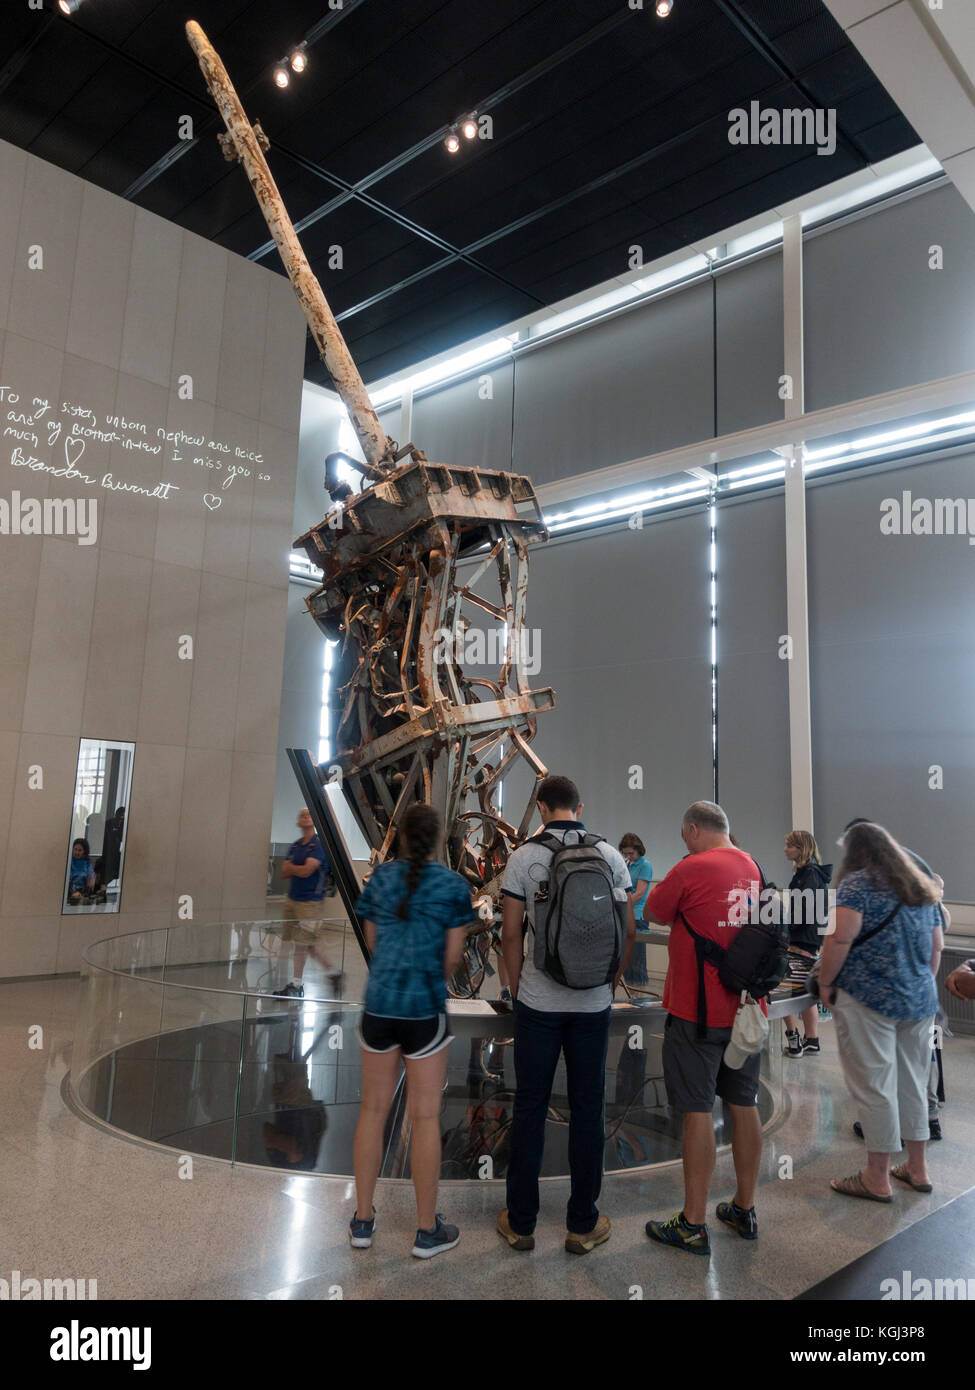 A section of the antenna from the North Tower of the World Trade Center on Sept 11th 2001 on display in Newseum, Washington DC, United States. Stock Photo